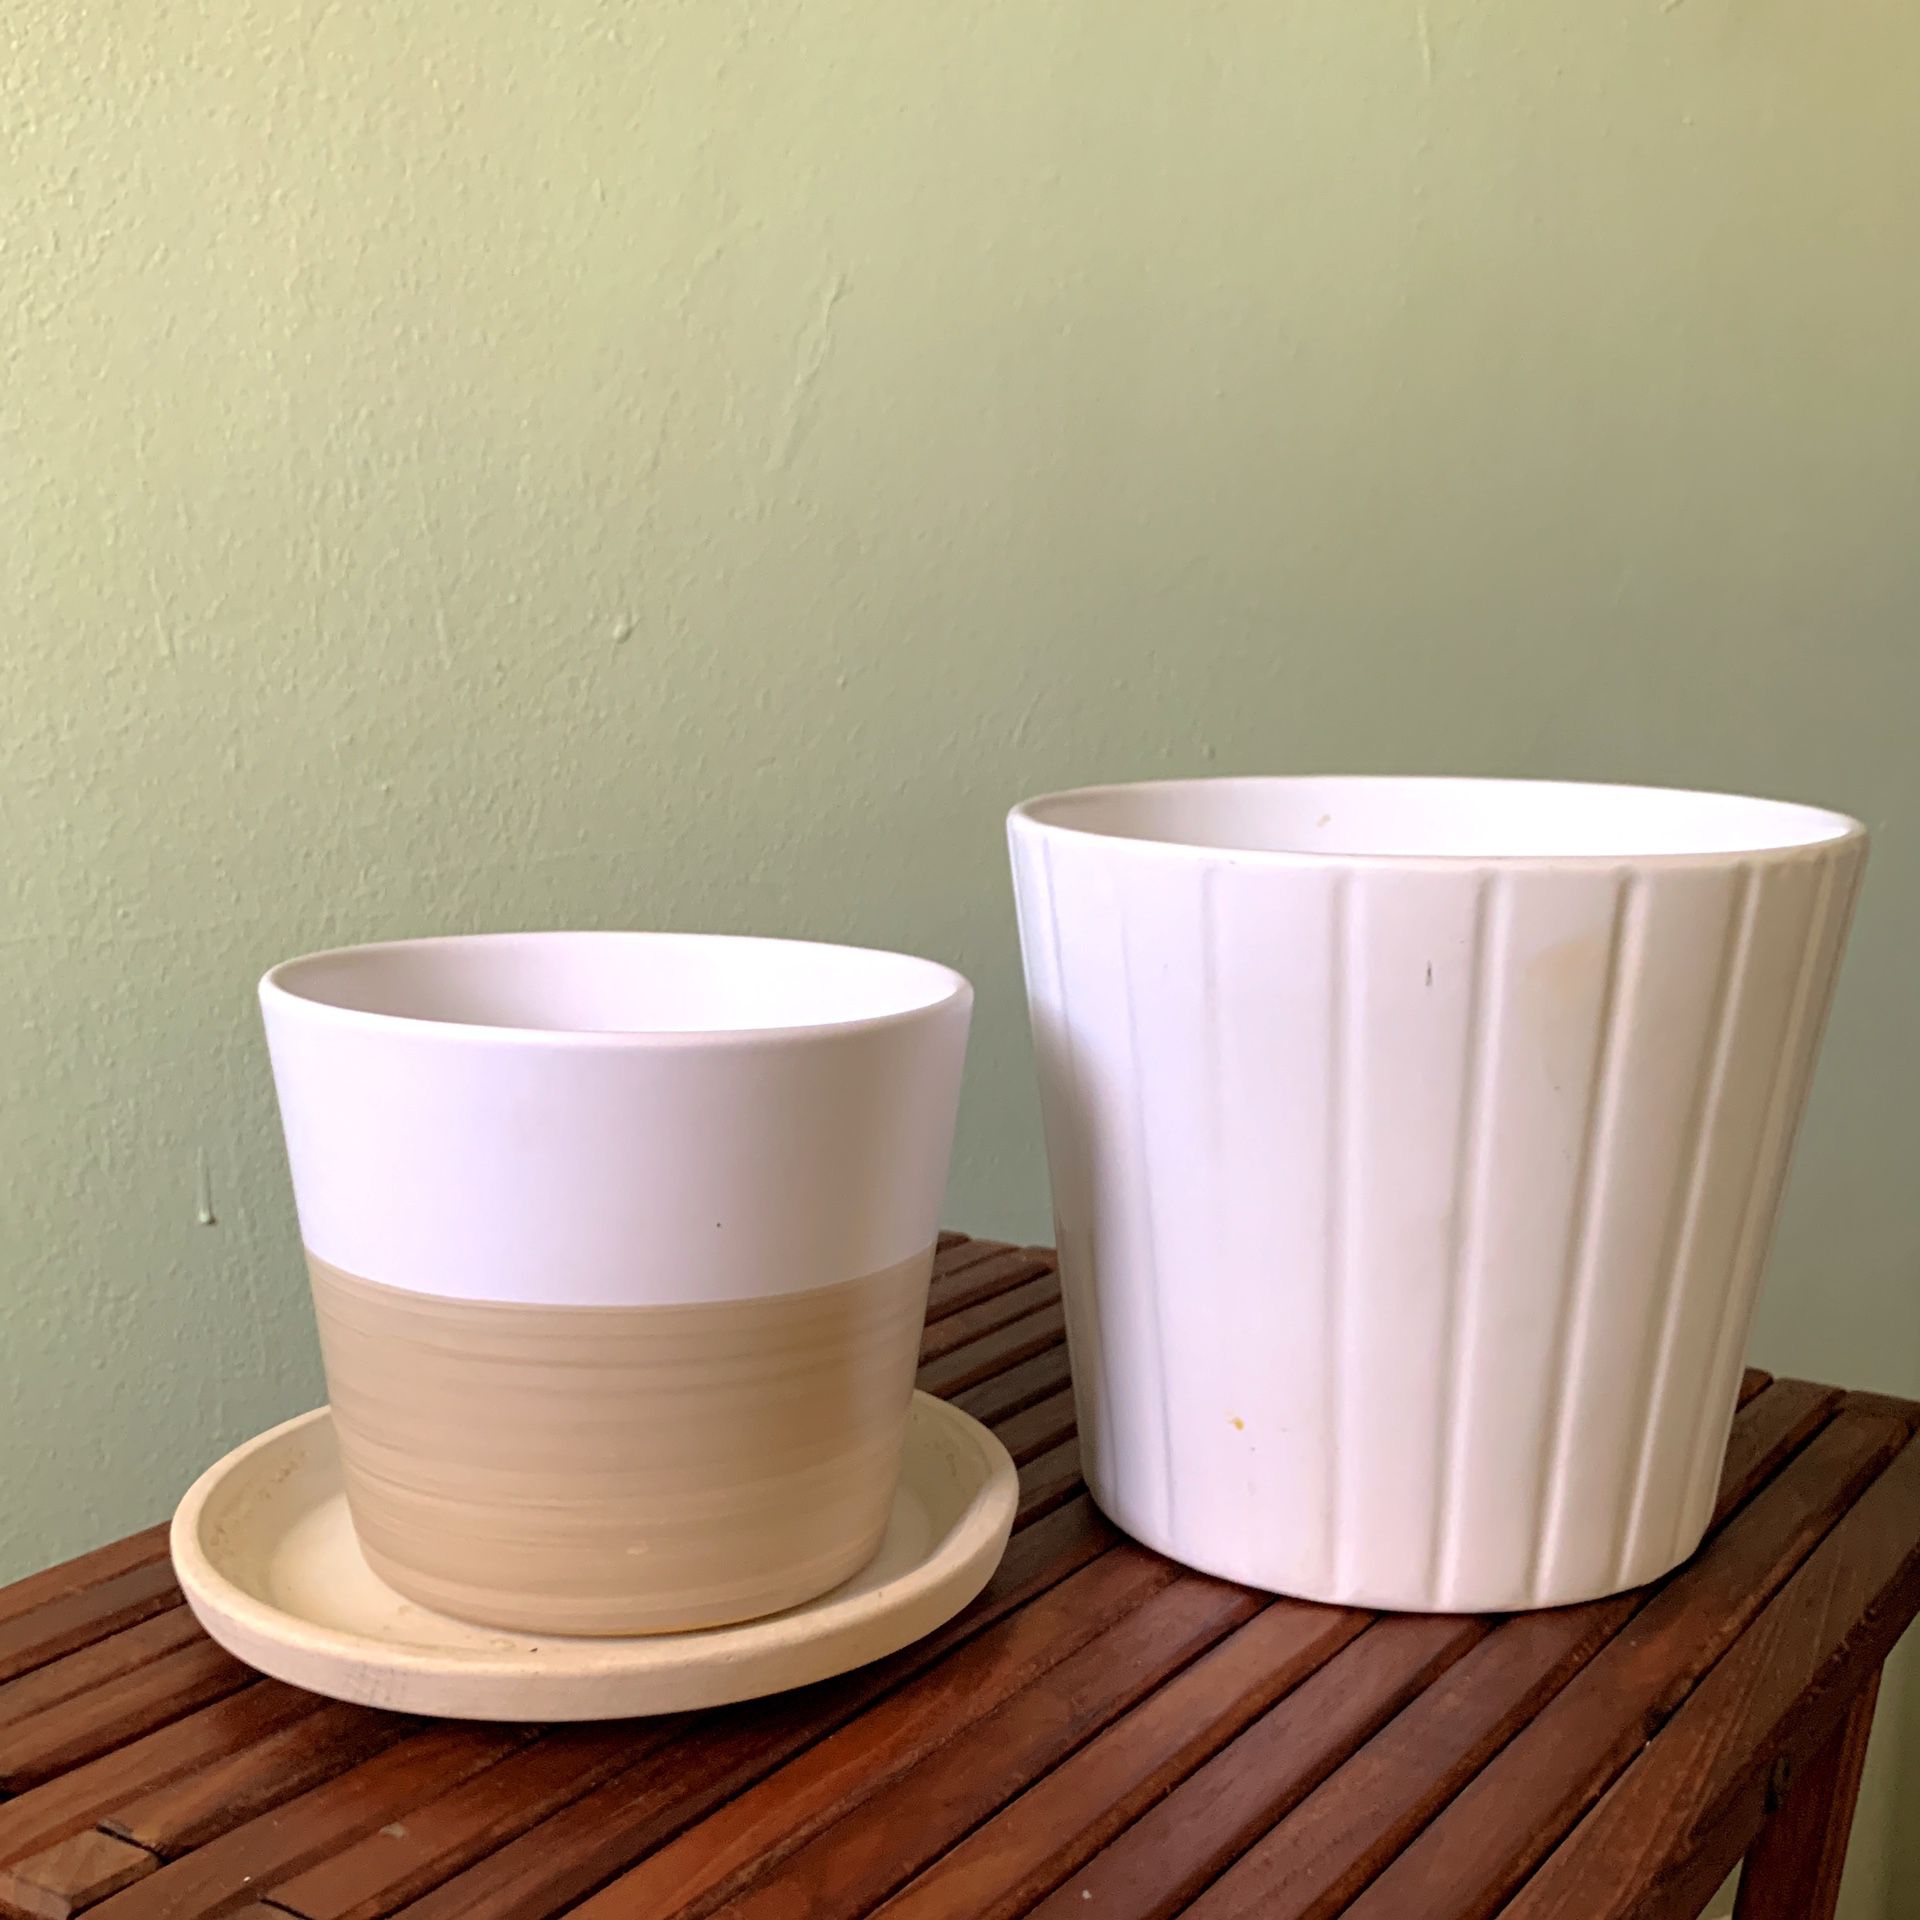 The Imperfect Ceramic Planters (set of two)